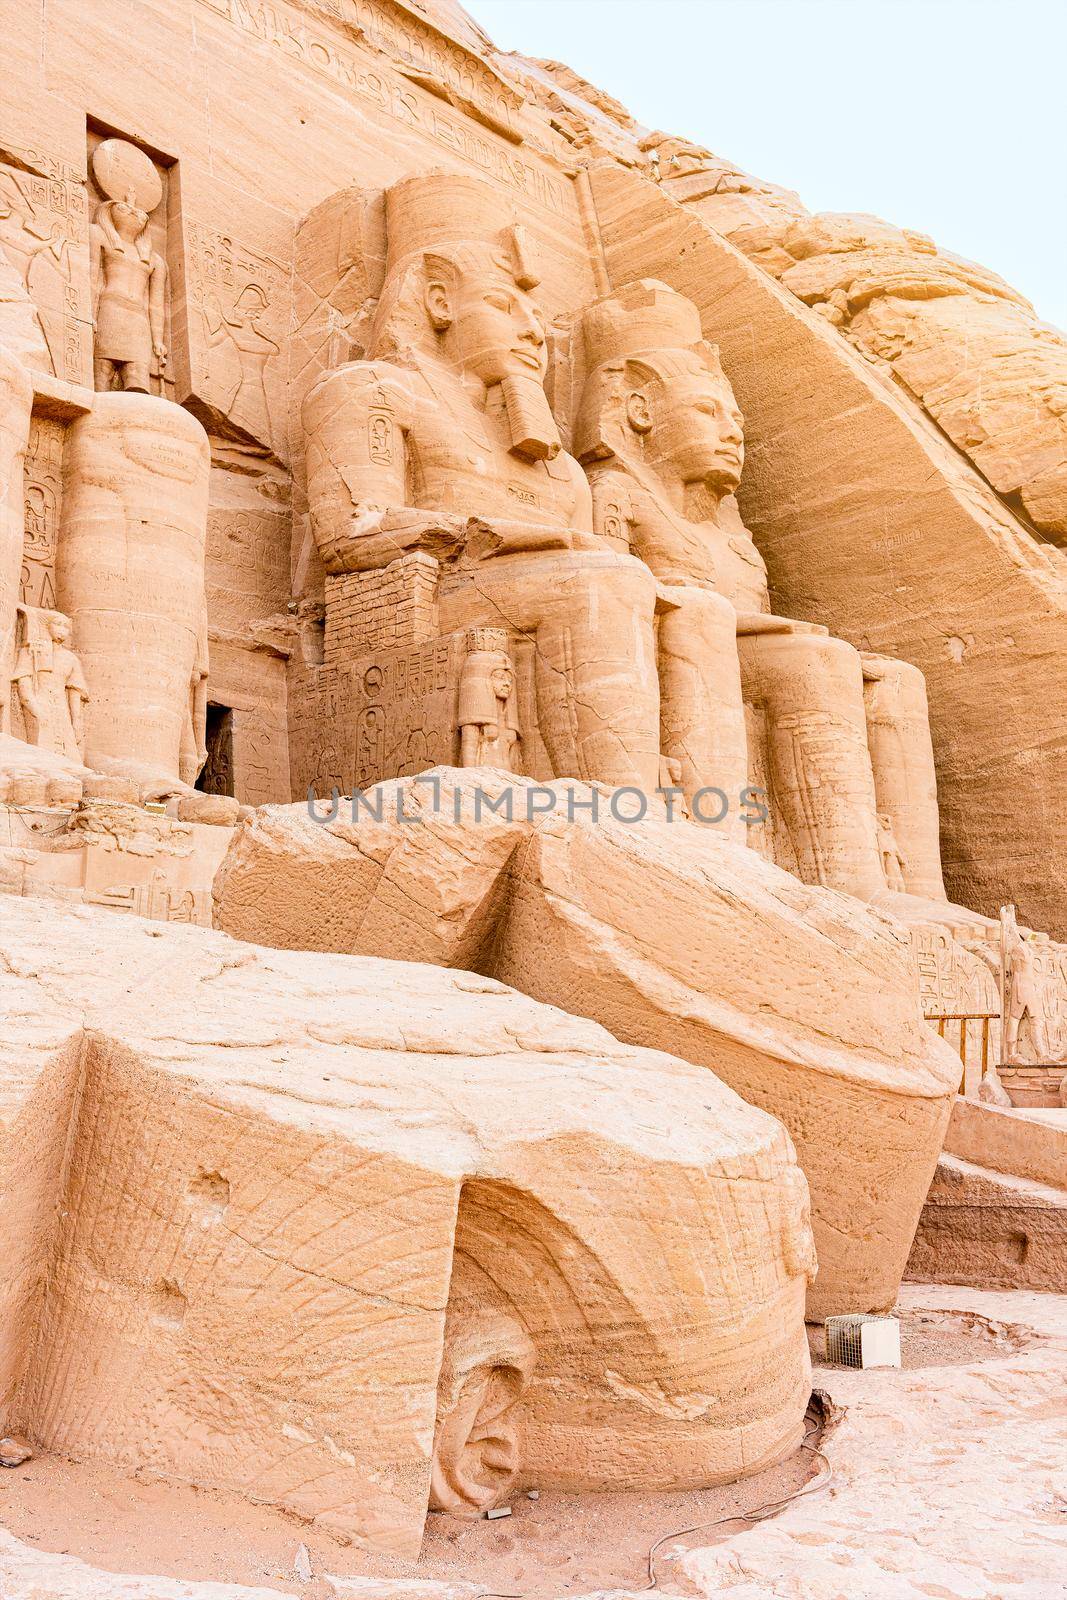 Profile photo of the entrance and some ruins of the Ramses II temple in Abu Simbel in Egypt